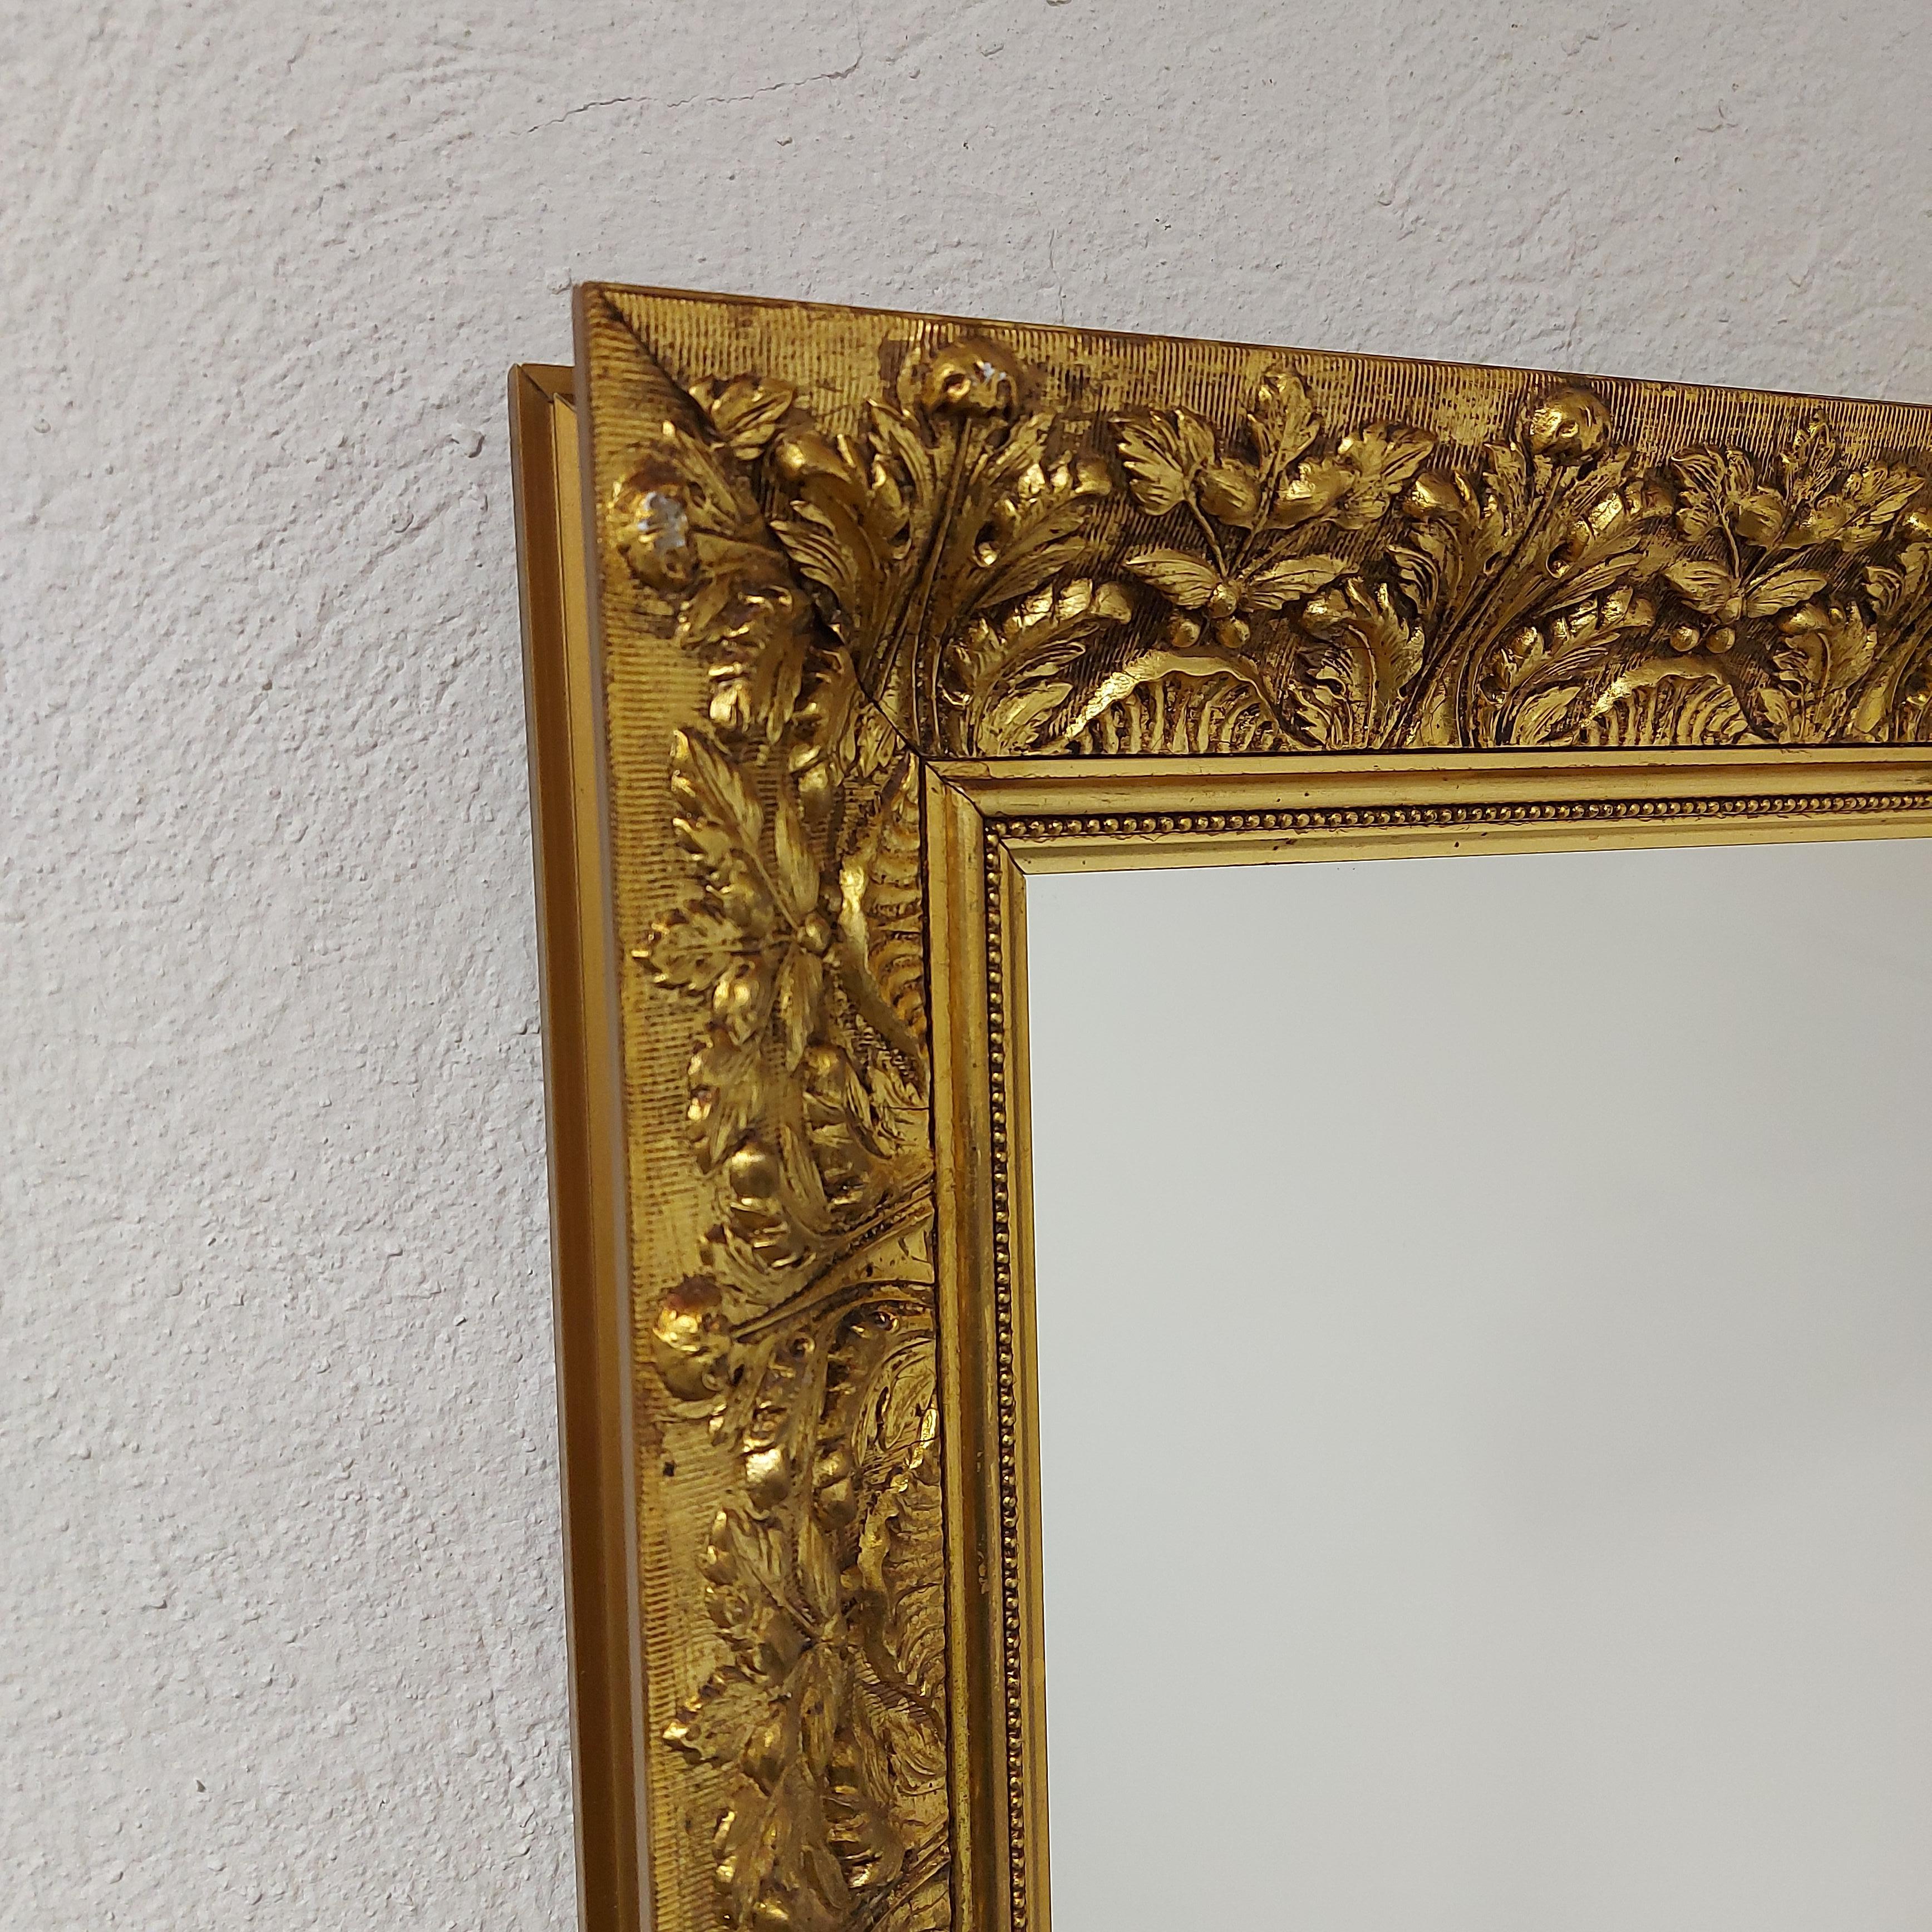 Good quality large gilt wall mirror, with a carved gilded frame from 1970, in excellent condition.  The frame is decorated with carvings in the style of early 19th century period.  The gilt wall mirror retains its original frame.  It is in large